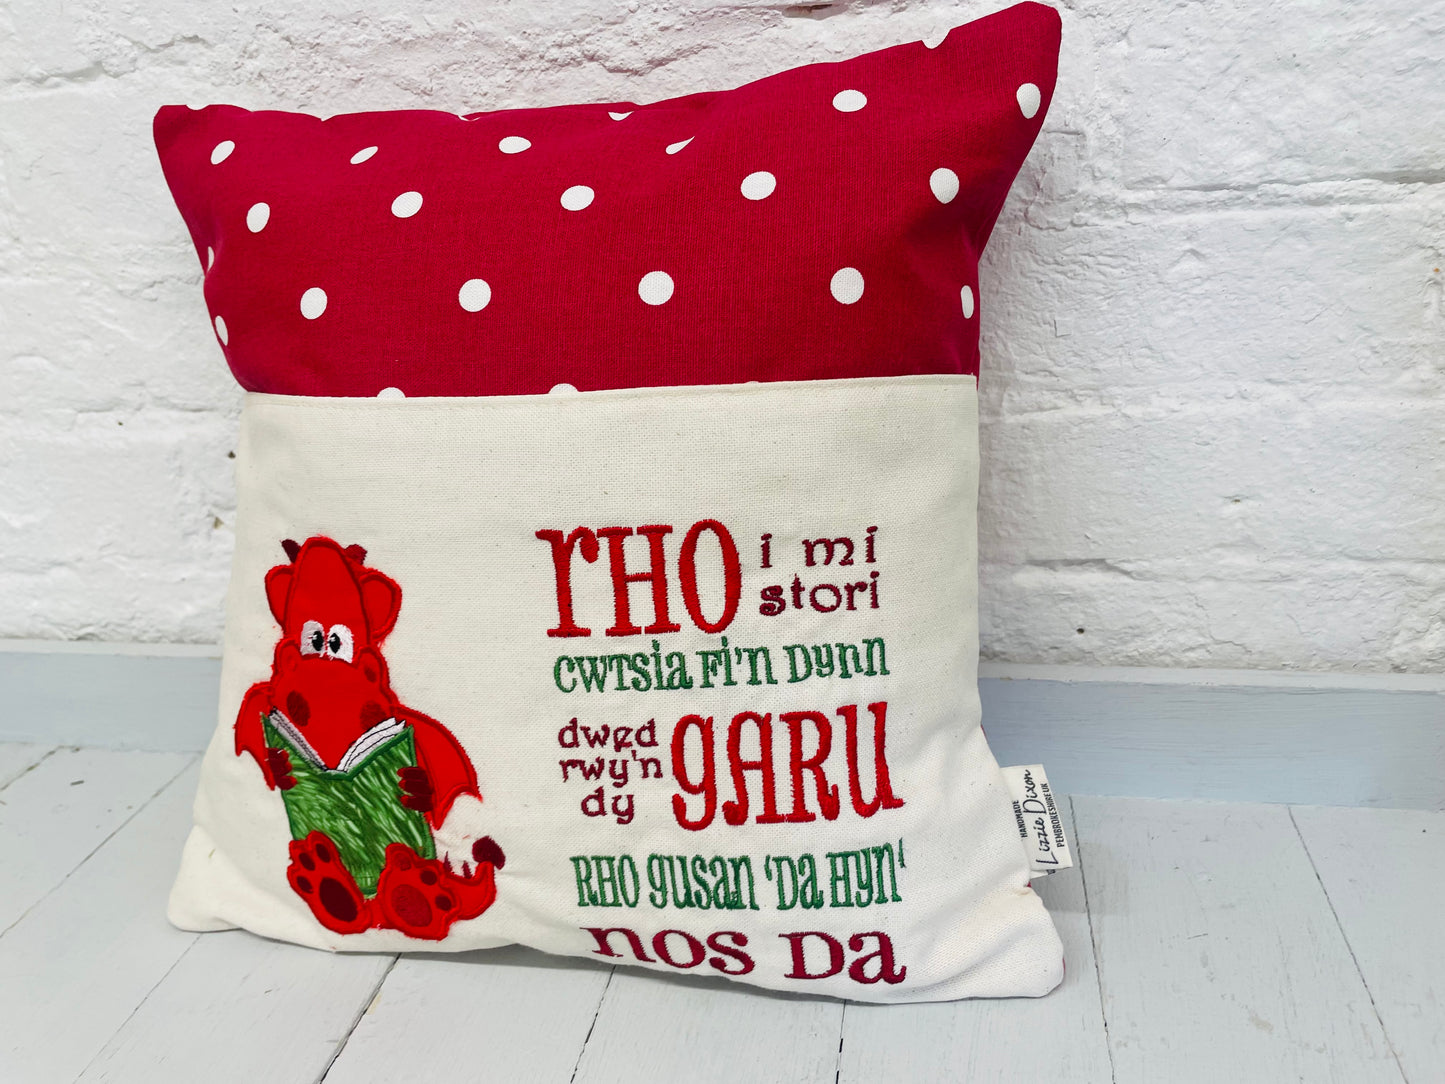 Red Dragon welsh Children's Reading Book Cushion.